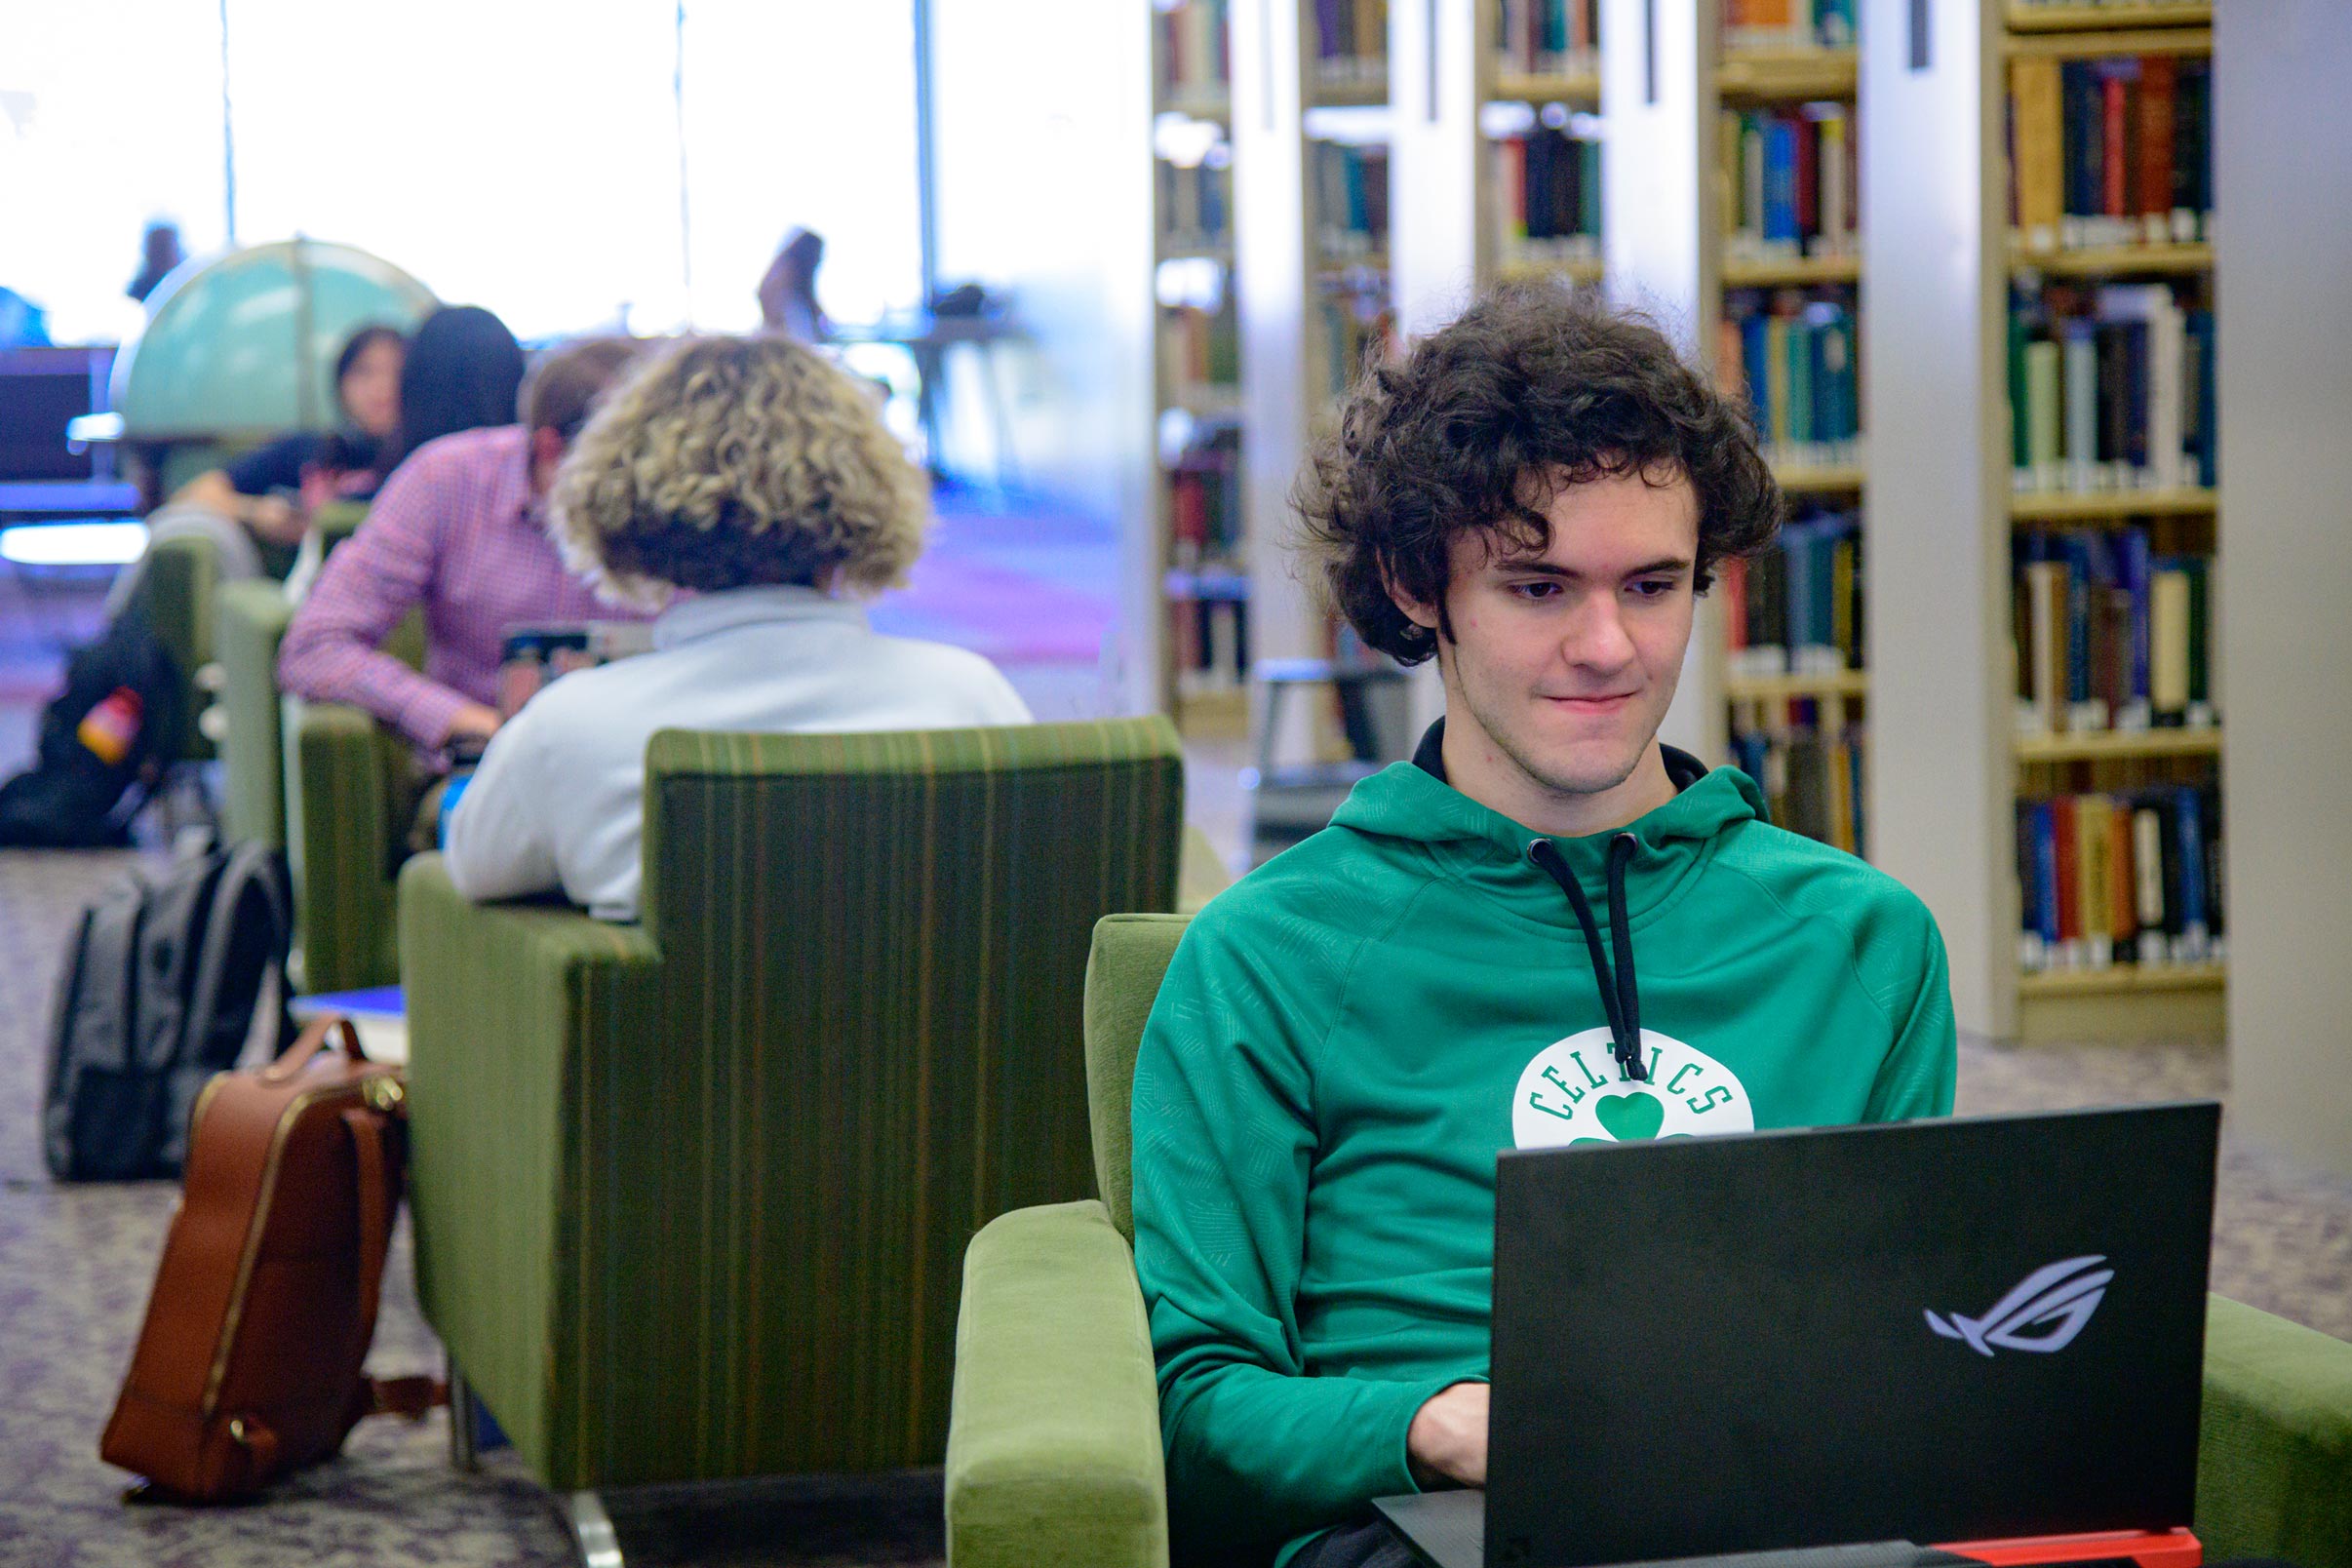 Student working on laptop in the library.